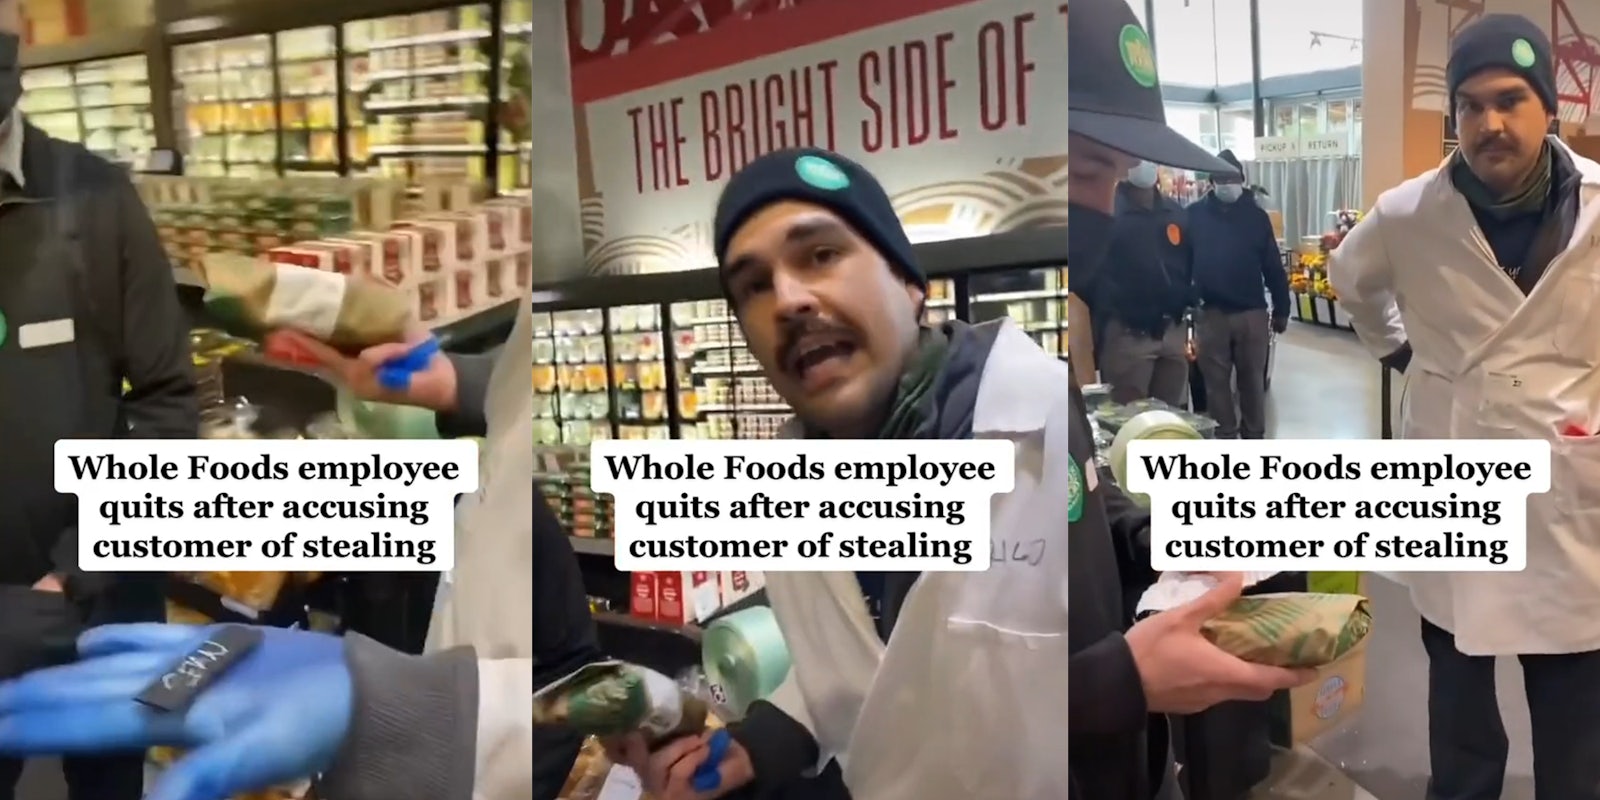 Whole Foods employees examining wrapped sub and receipt with captions 'Whole Foods employee quits after accusing customer of stealing'